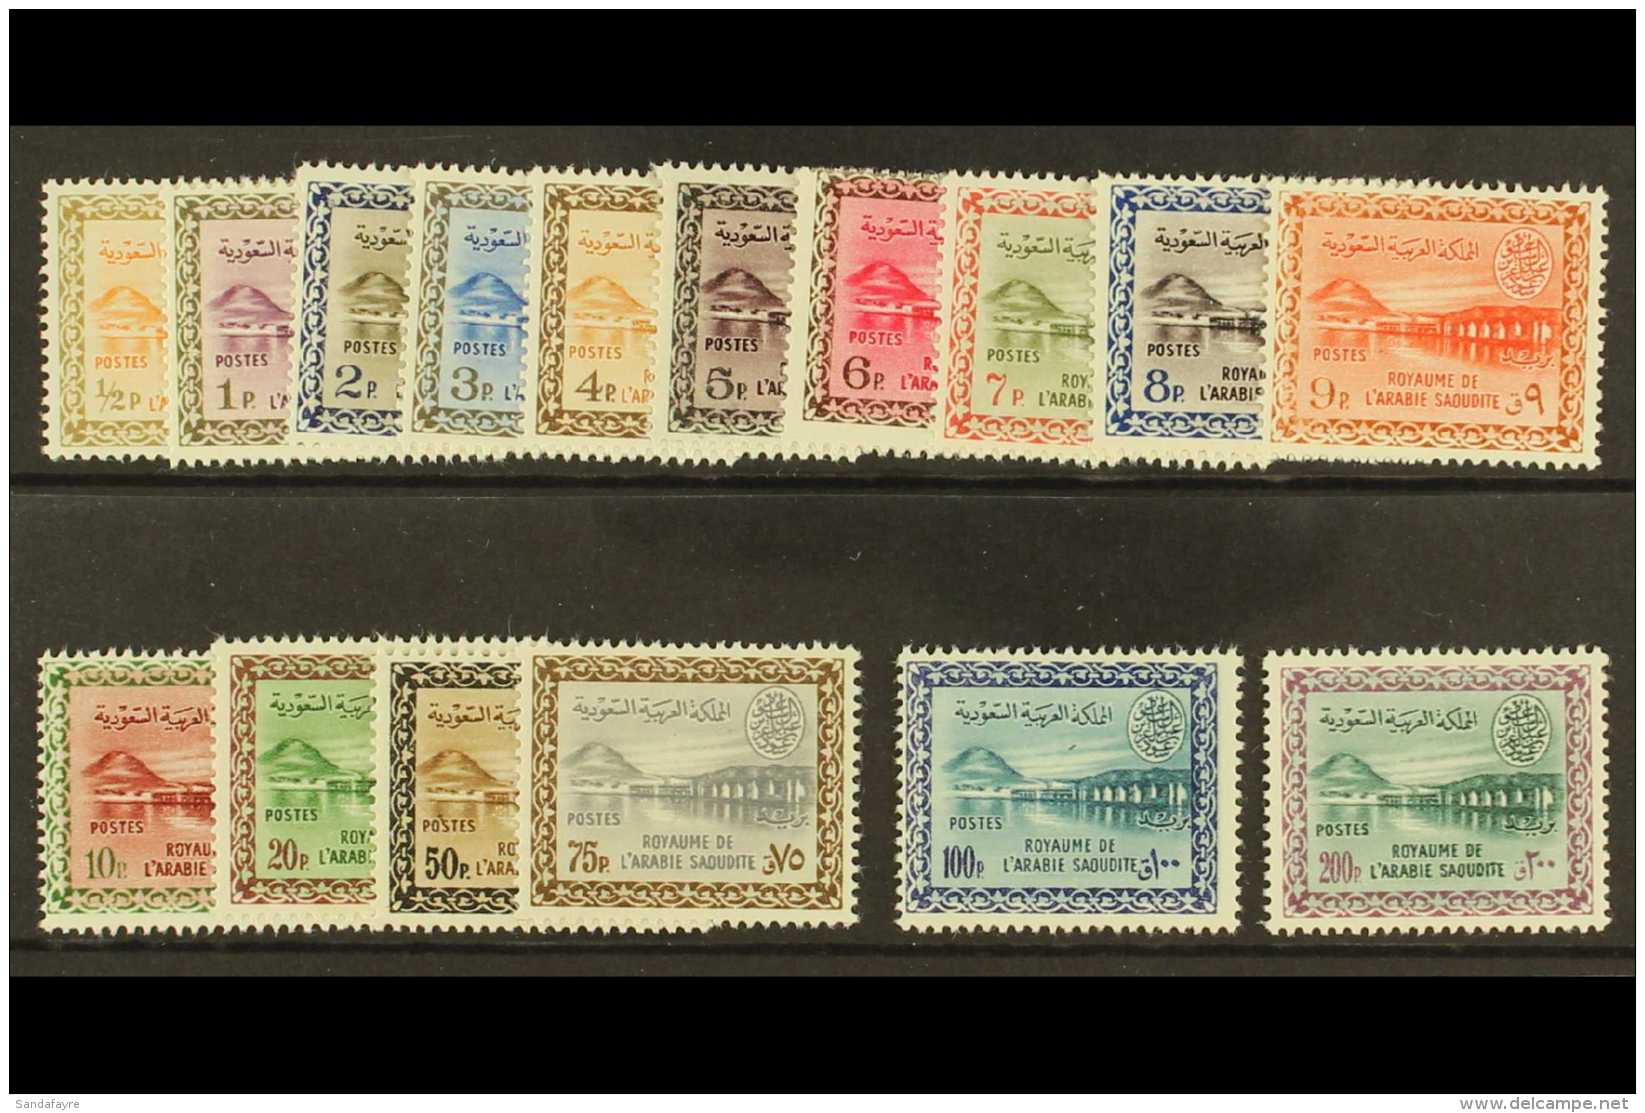 1960-61 Wadi Hanifa Dam Complete Definitive Set, SG 412/427, Never Hinged Mint. (16 Stamps) For More Images,... - Arabie Saoudite